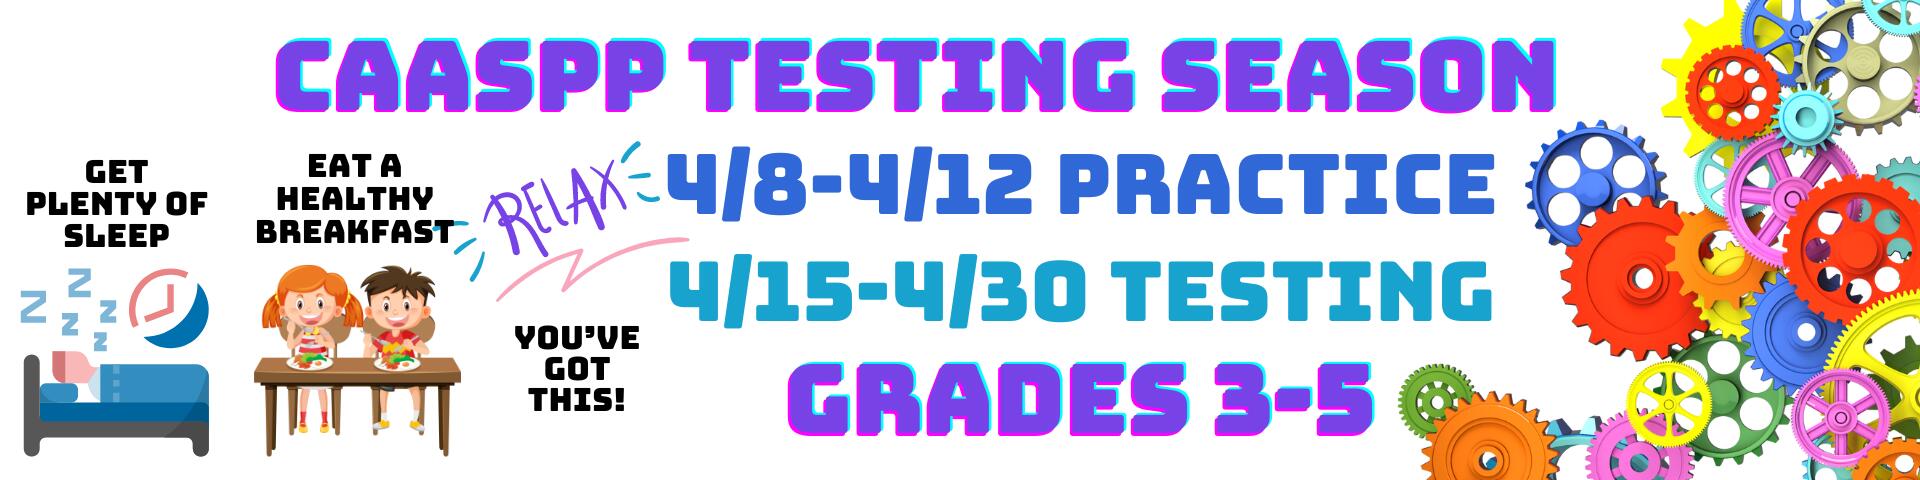 sbac testing, practice 4/8-4/12, testing for grades 3-5 4/15-4/26